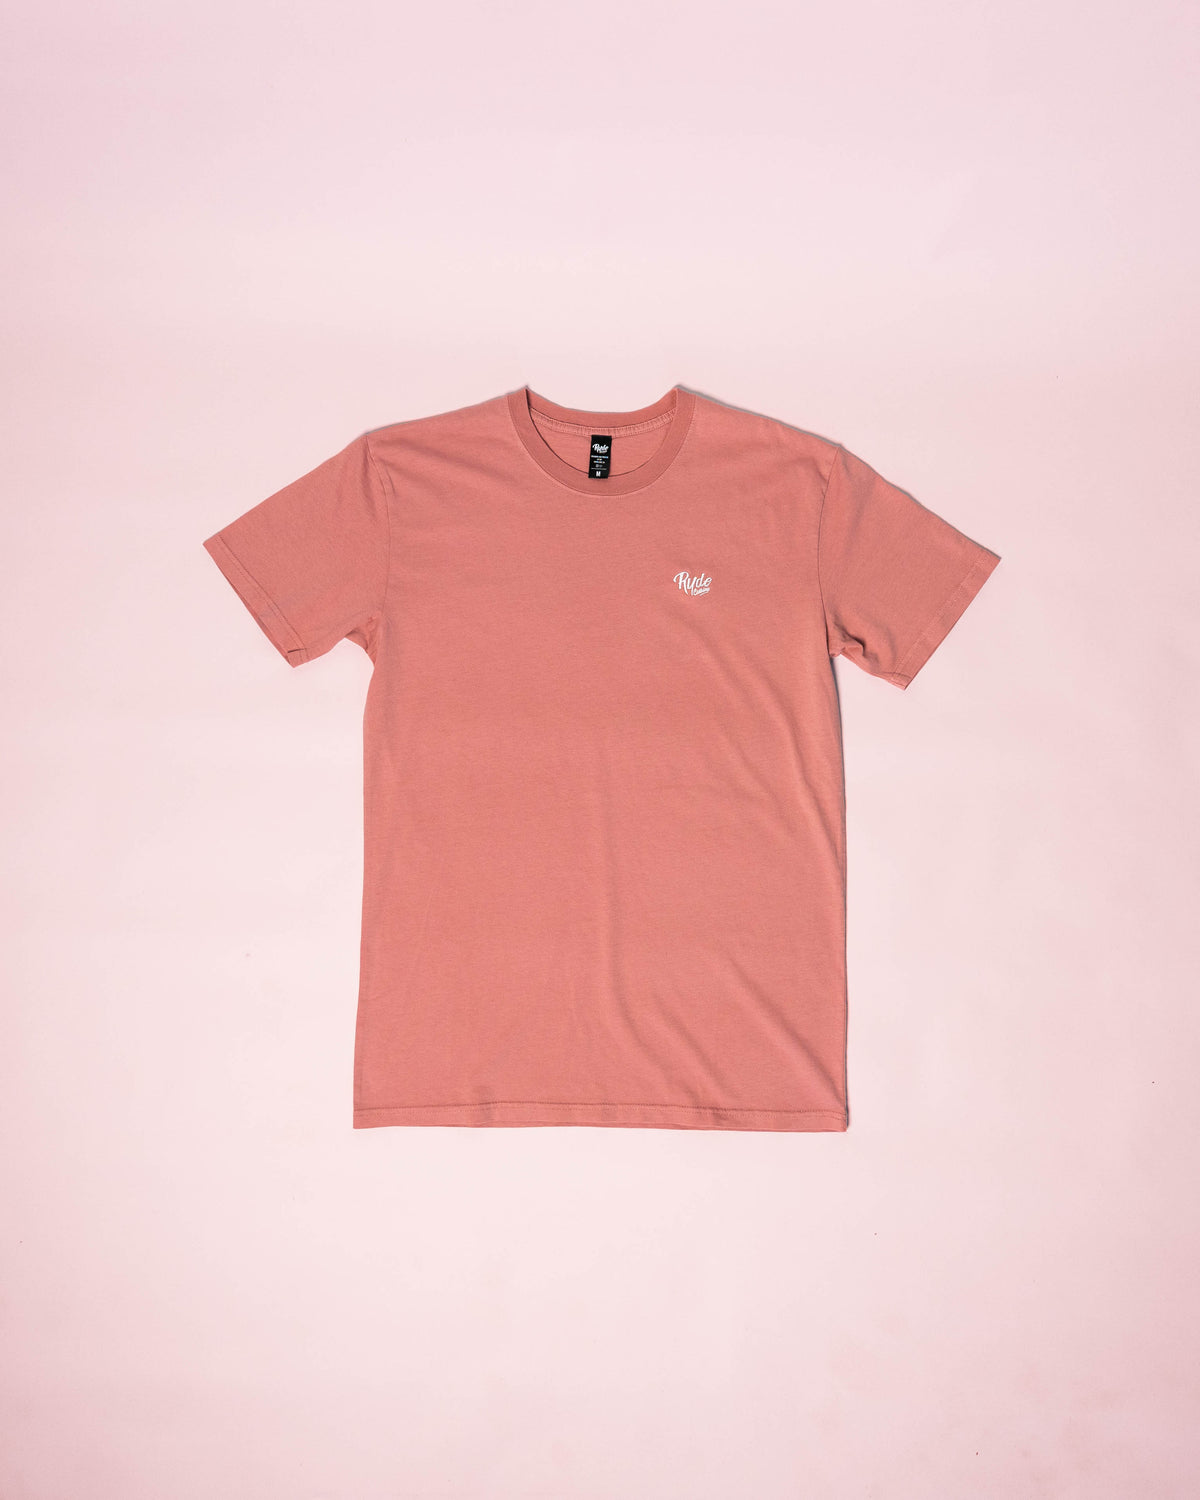 Ryde Embroidered Logo Tee Faded Pink